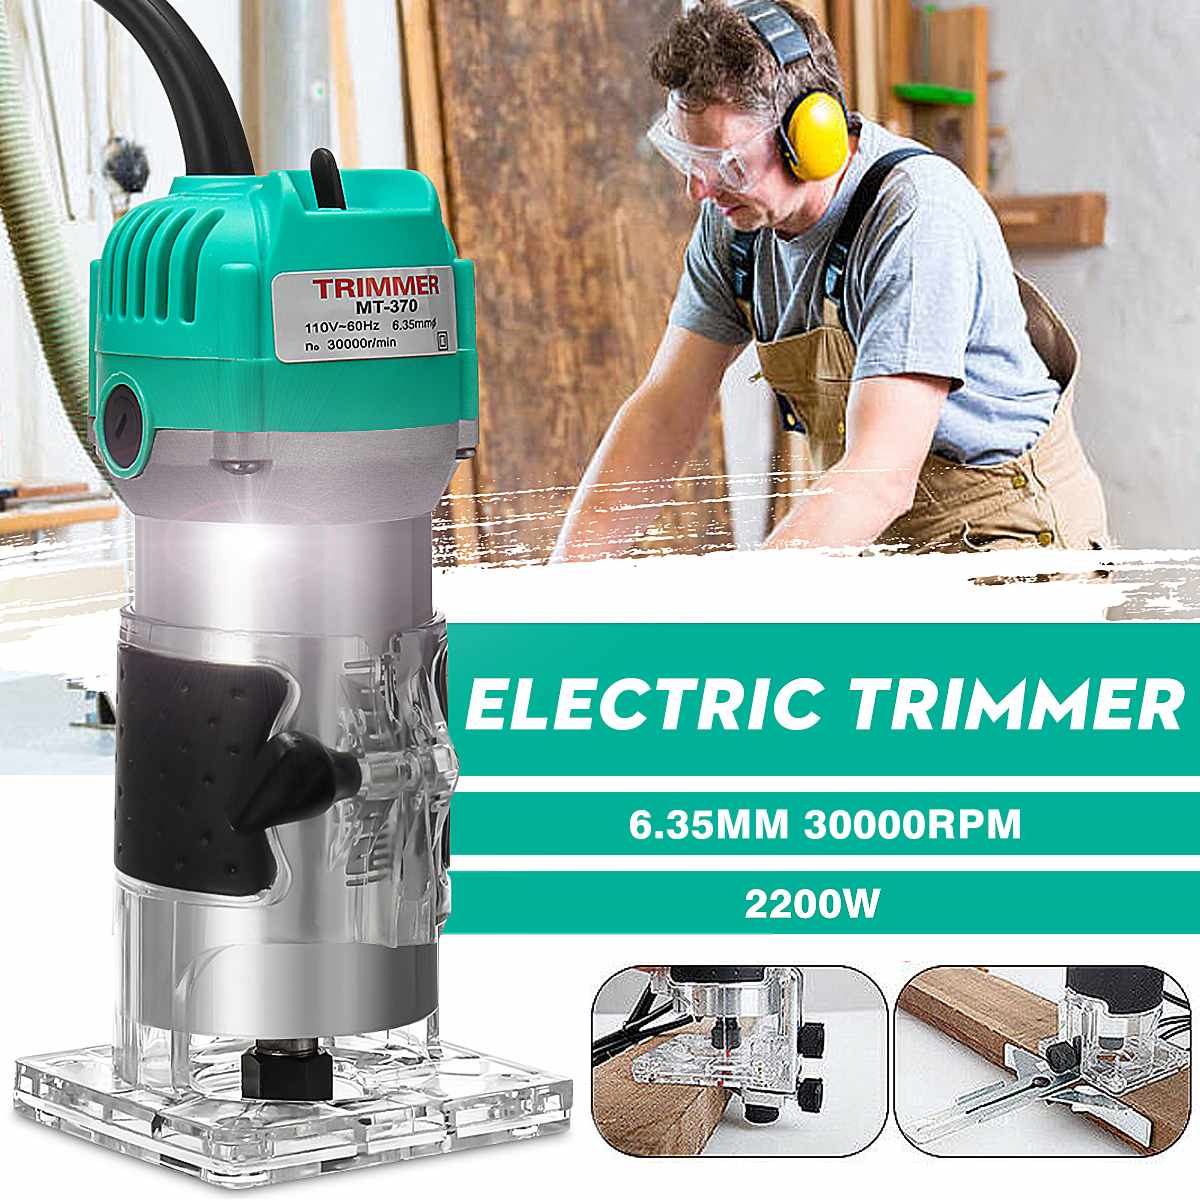 2200W 1/4 Inch Corded Wood Laminate Router 30000RMP Electric Hand Trimmer Woodworking Tool With 60inch Cable